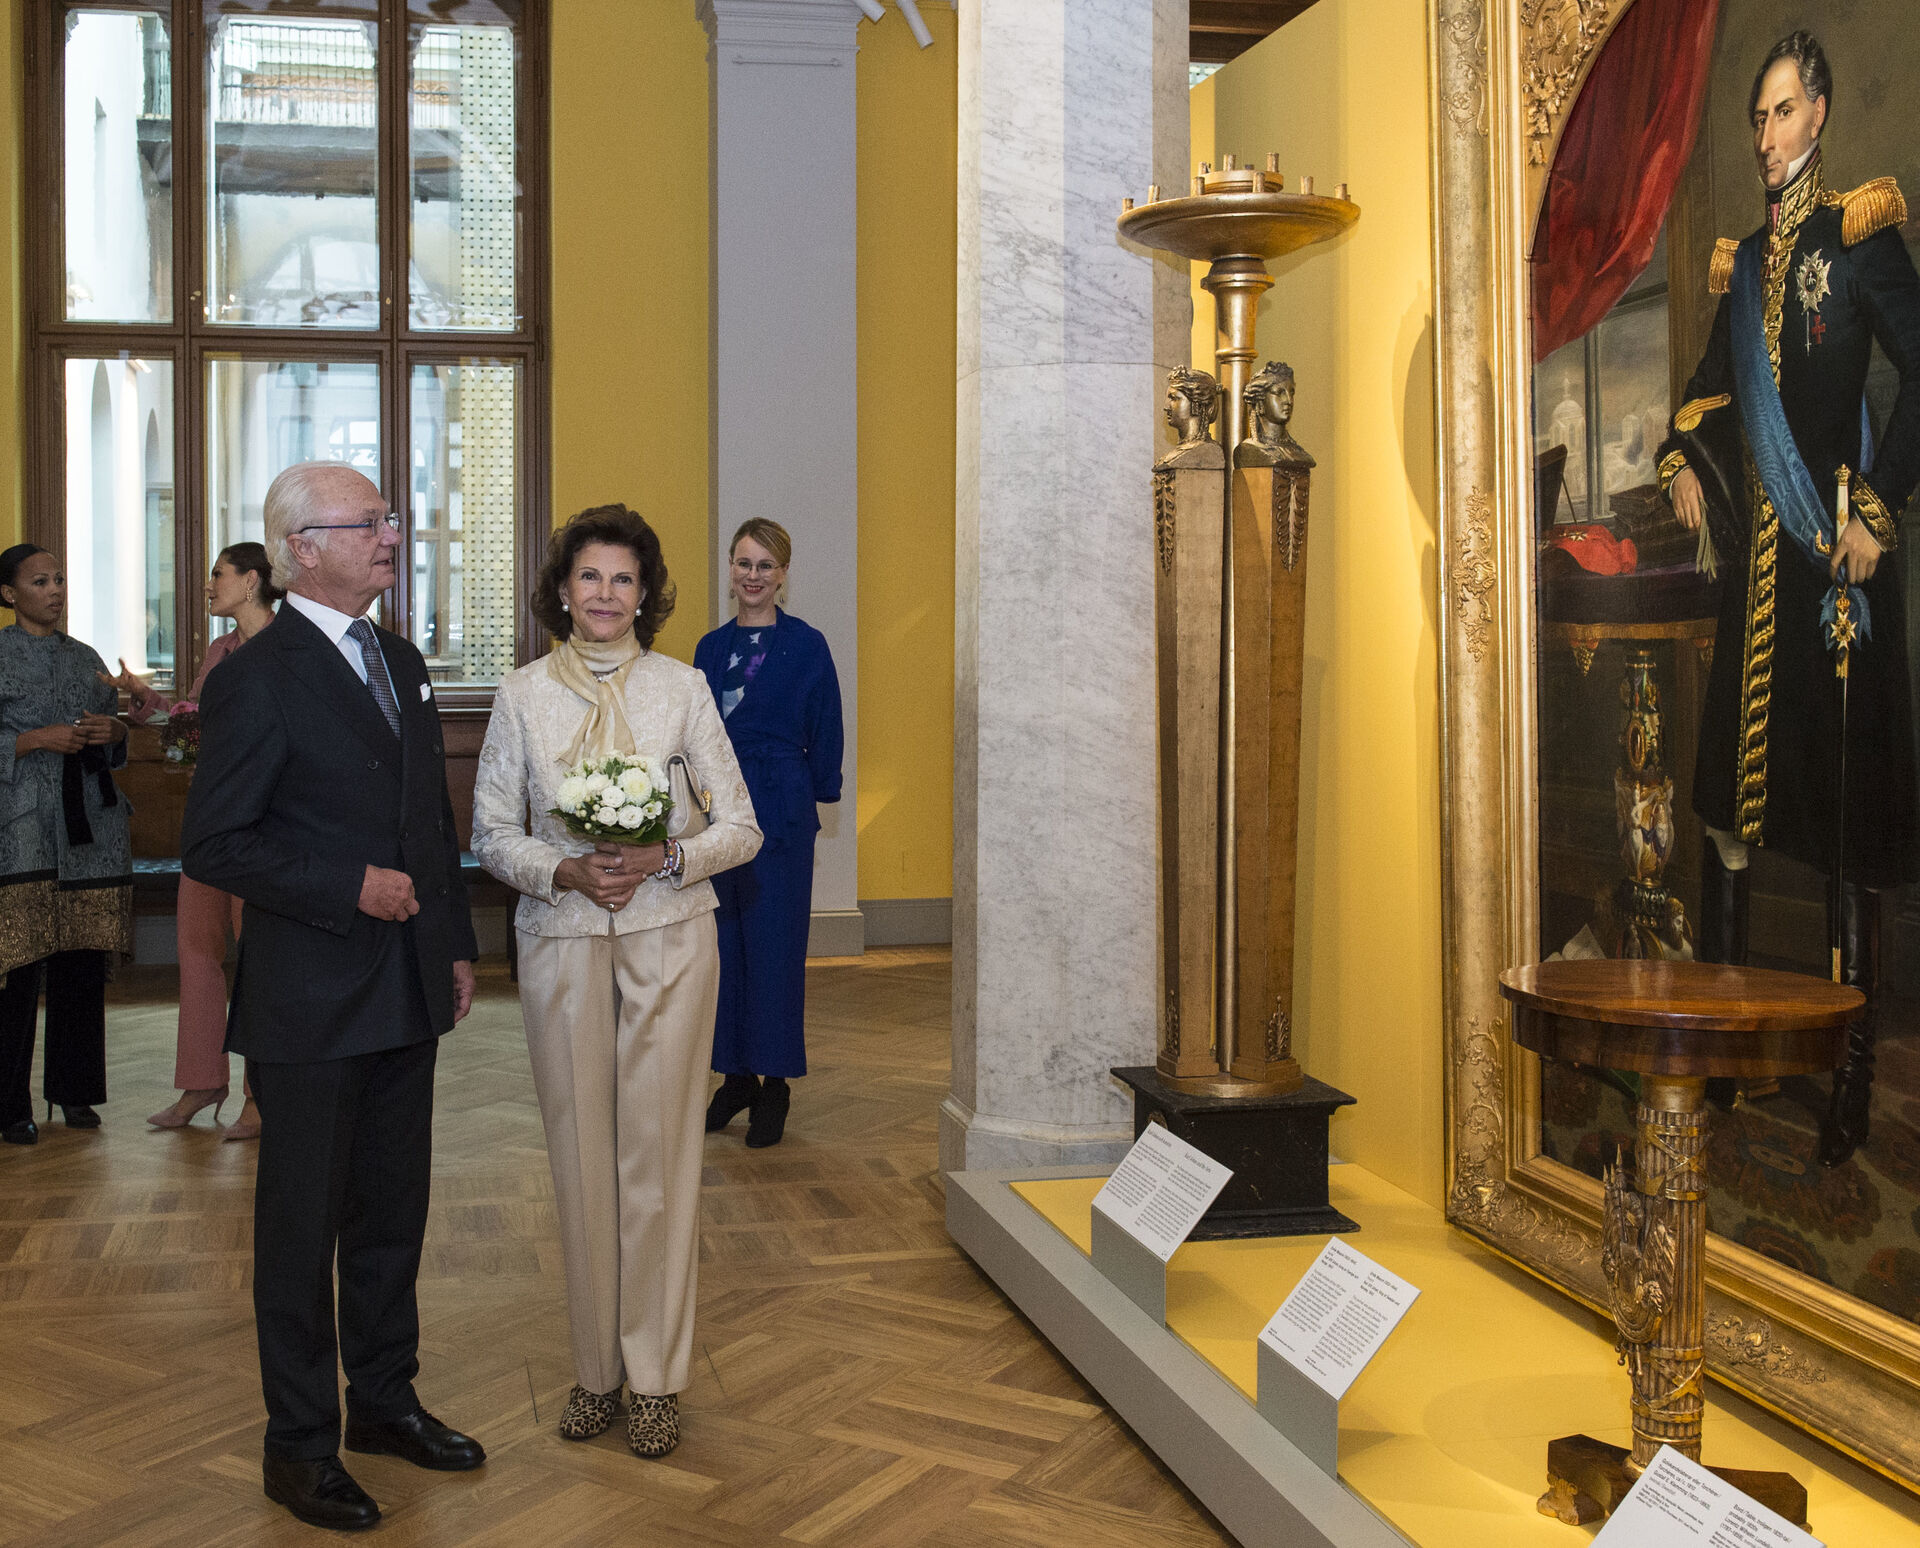 HM King Carl of Sweden, HM Queen Silvia looking at the portrait of King Karl XIV, painted by Emile Mascré.